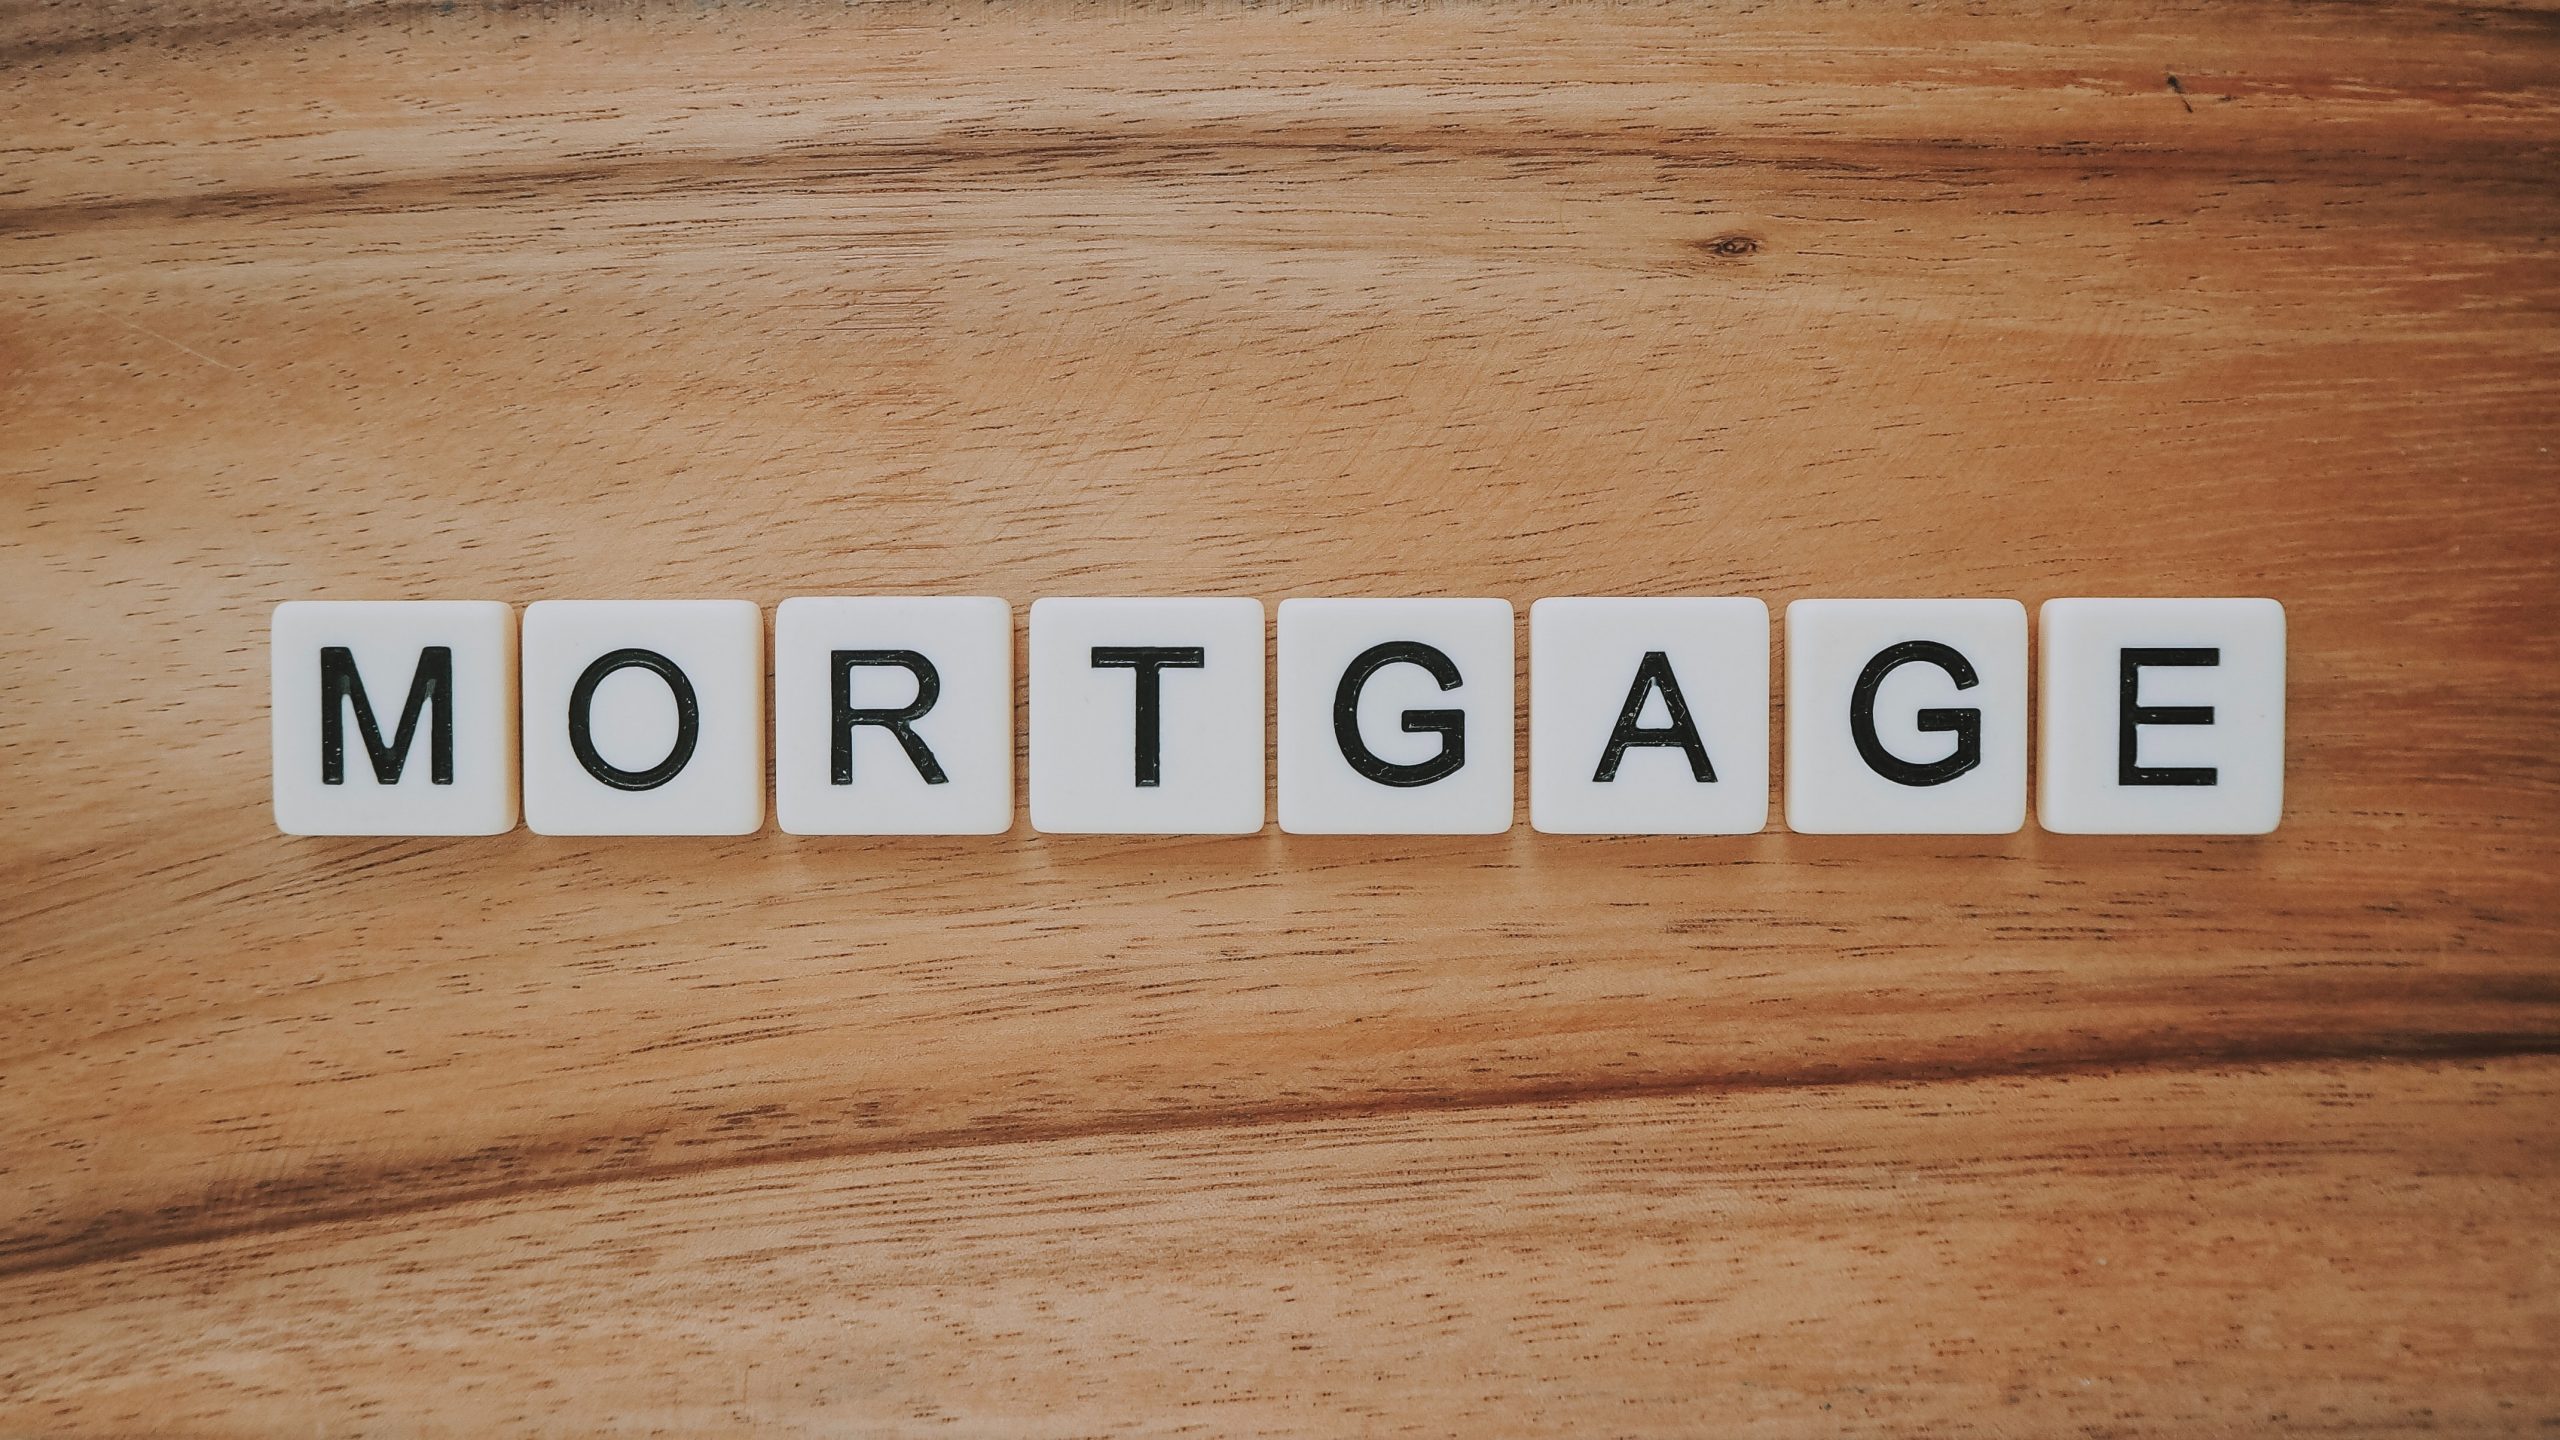 Mortgage in Kenya: Why You Should Consider Getting One